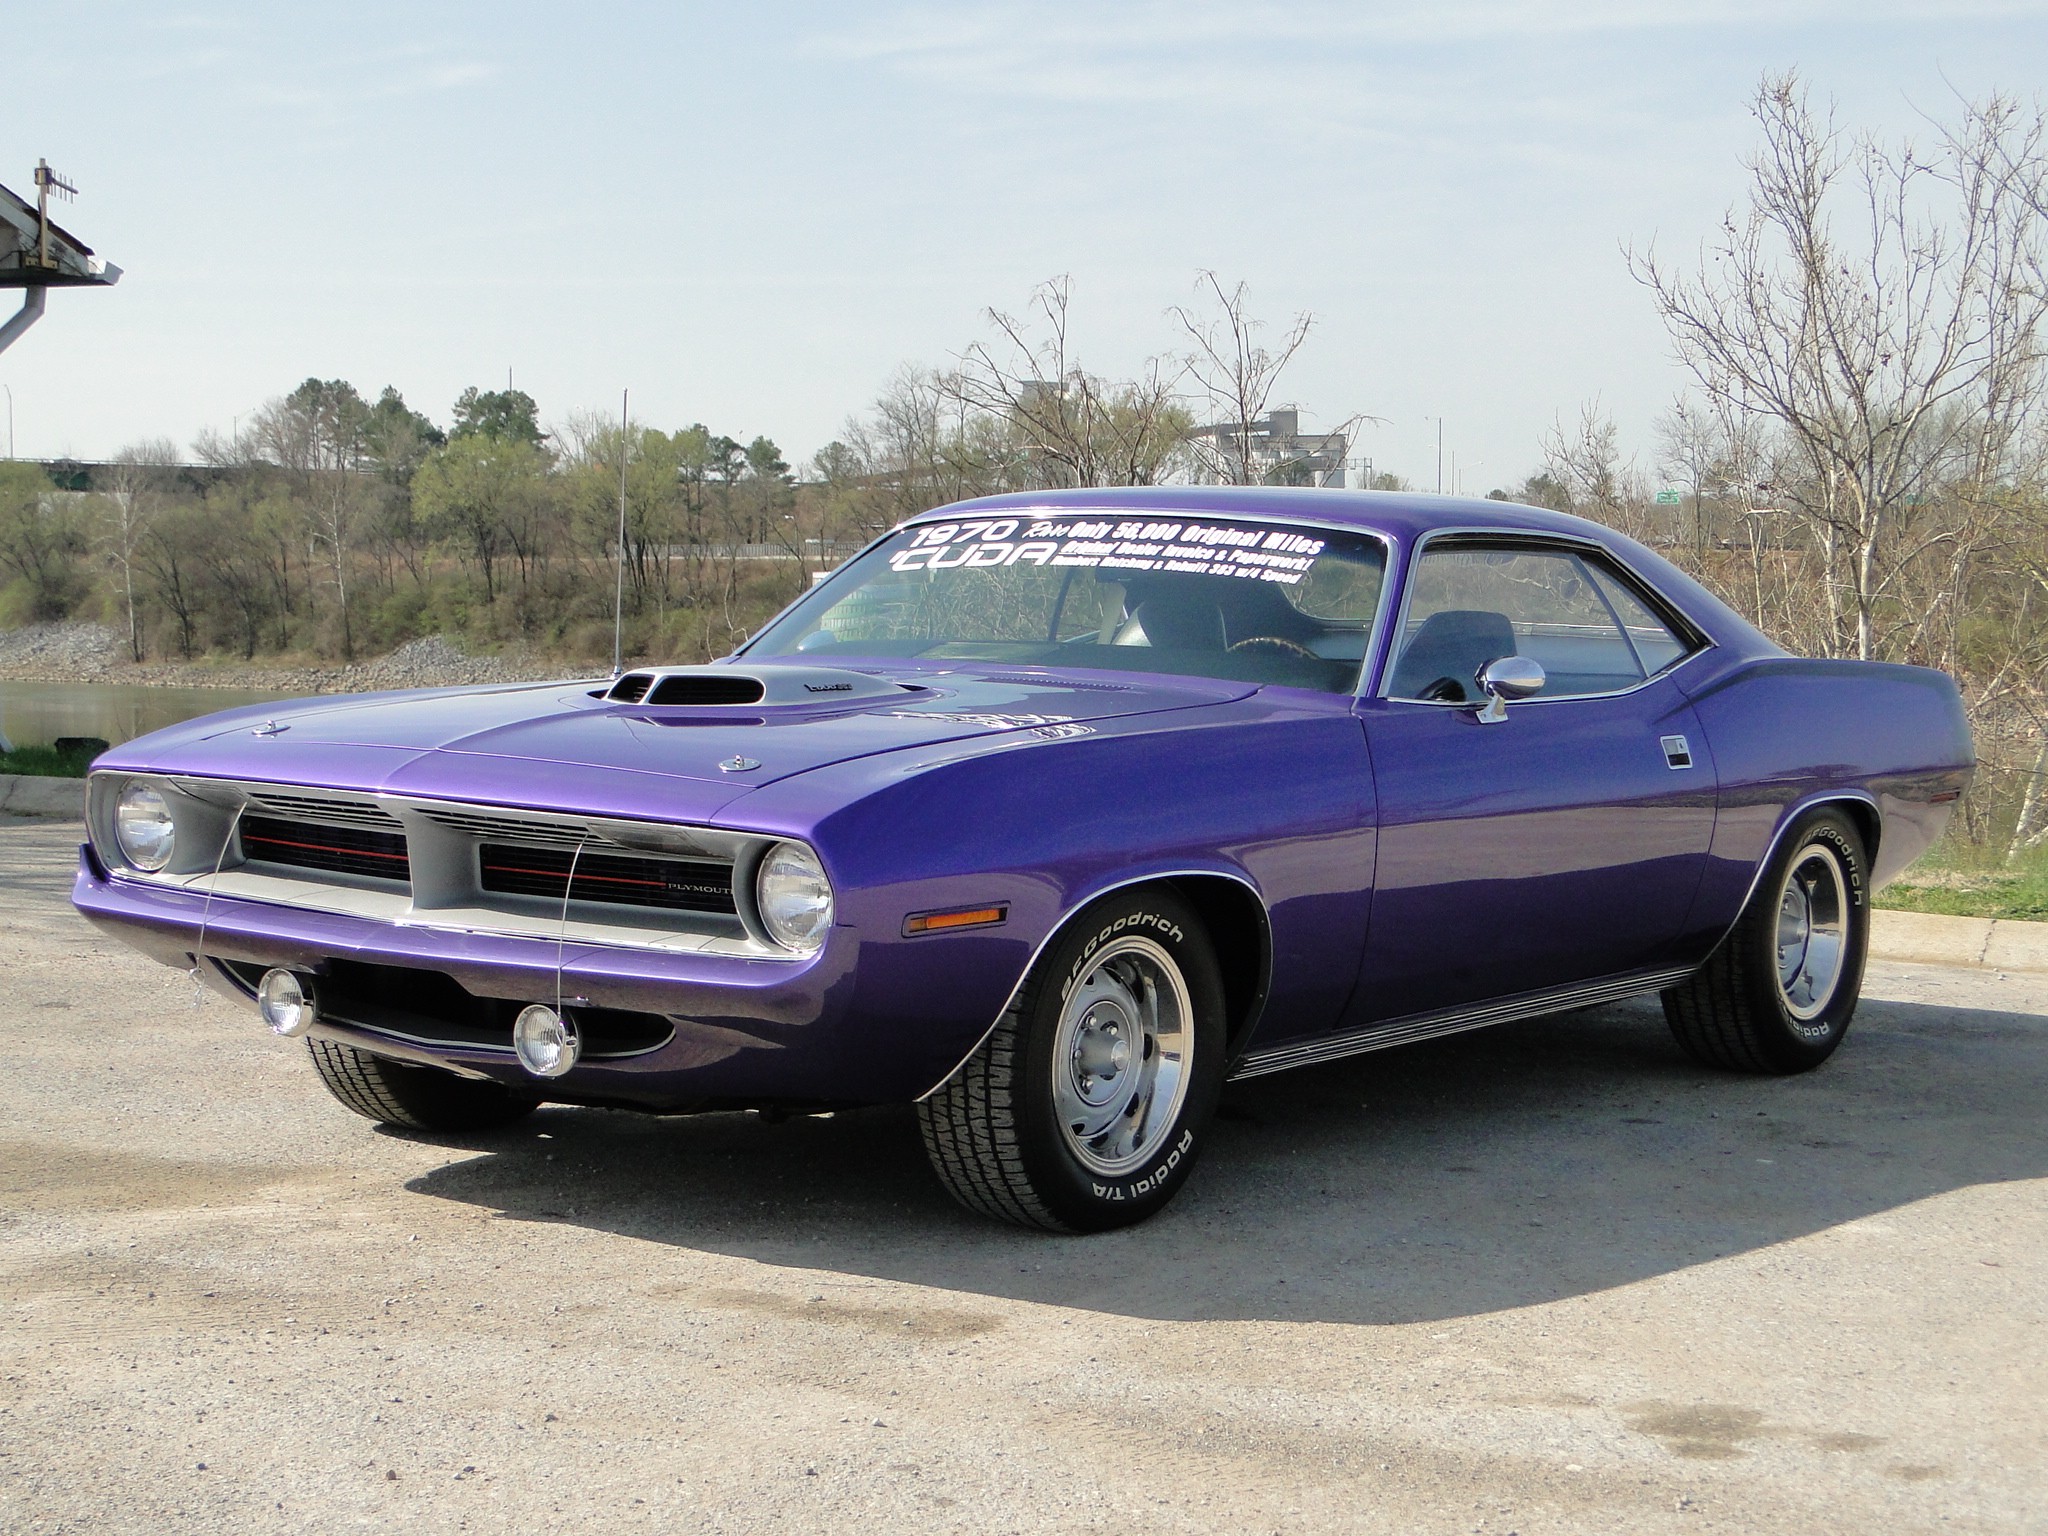 cars, Sports, Muscle, Cars, Plymouth, Vehicles, Barracuda, Classic, Cars Wallpaper